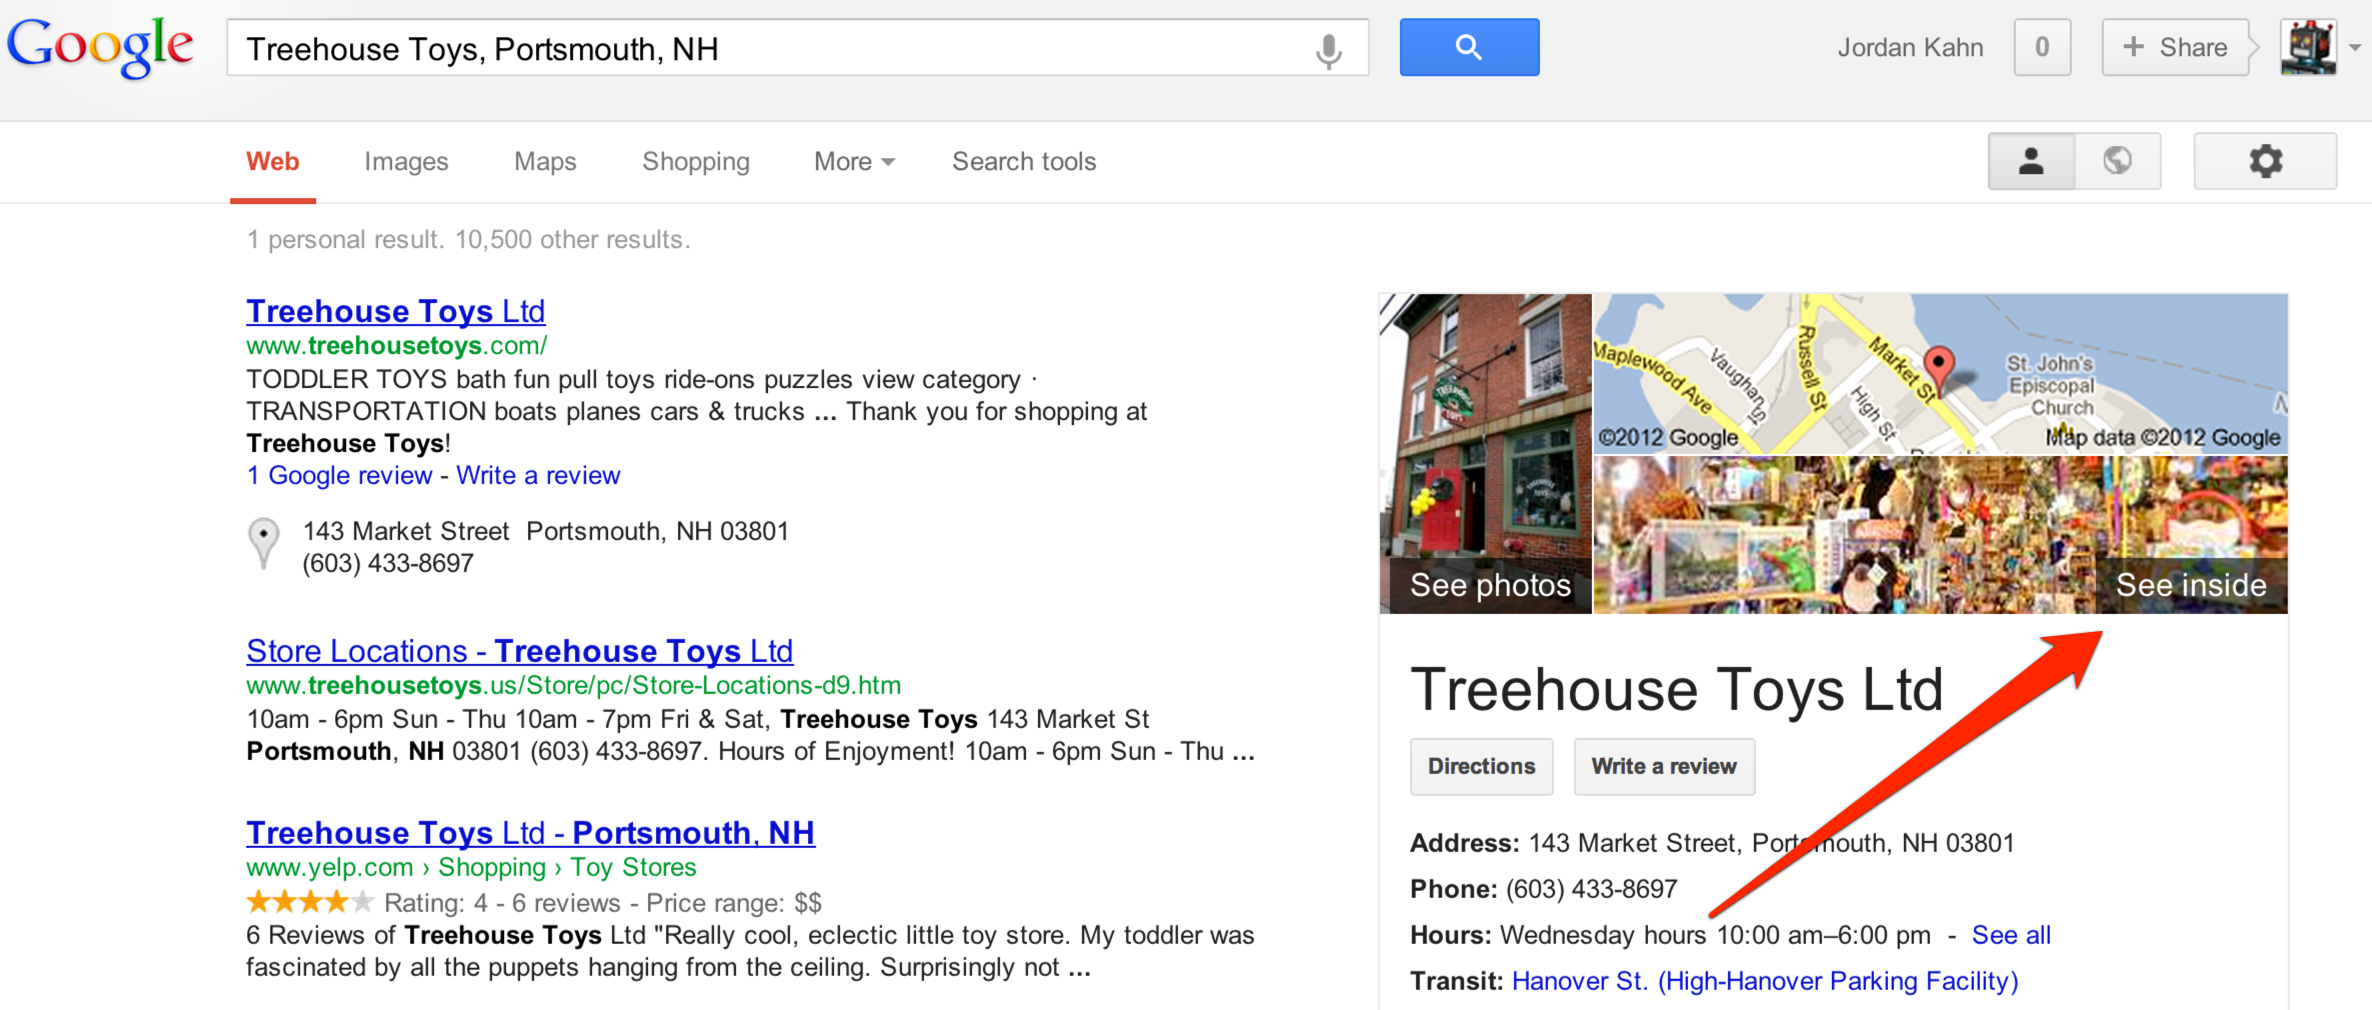 See Inside-search results-Street View